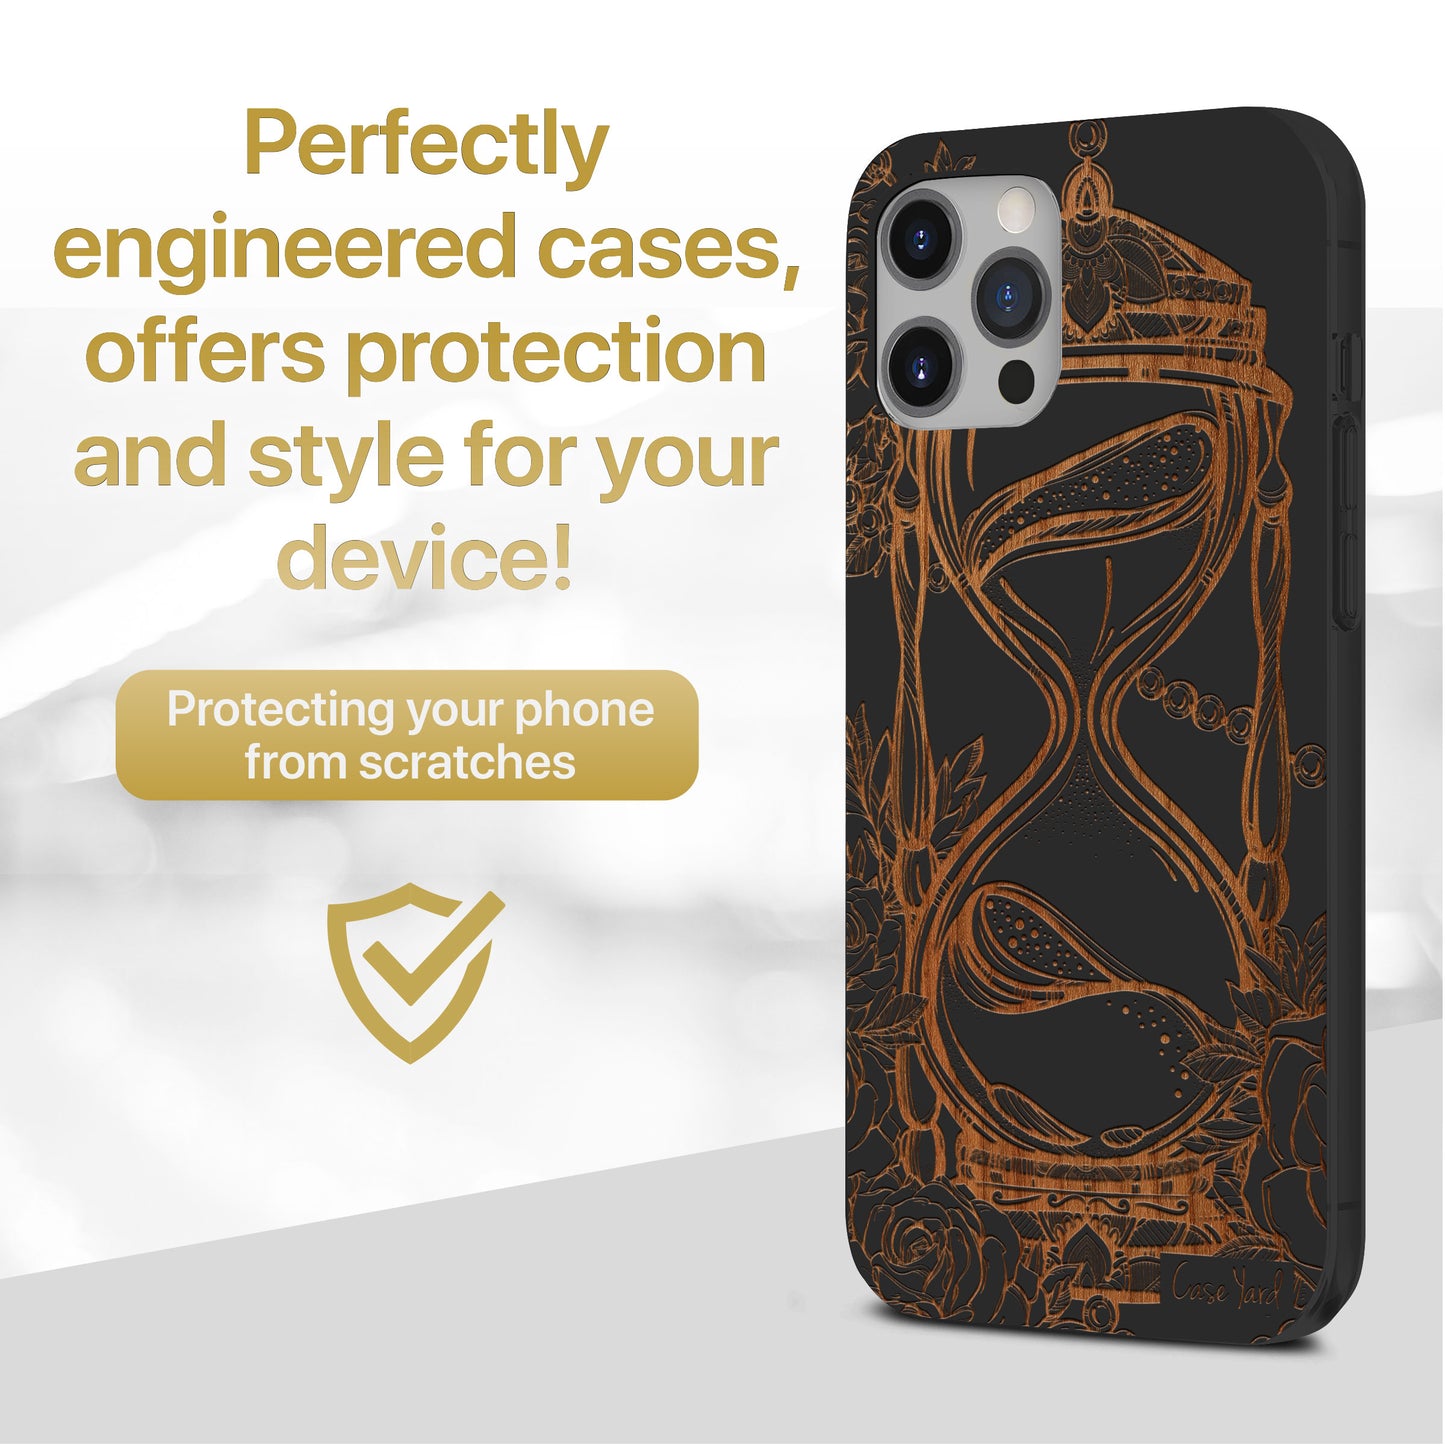 Wooden Cell Phone Case Cover, Laser Engraved case for iPhone & Samsung phone Hourglass with Roses Design